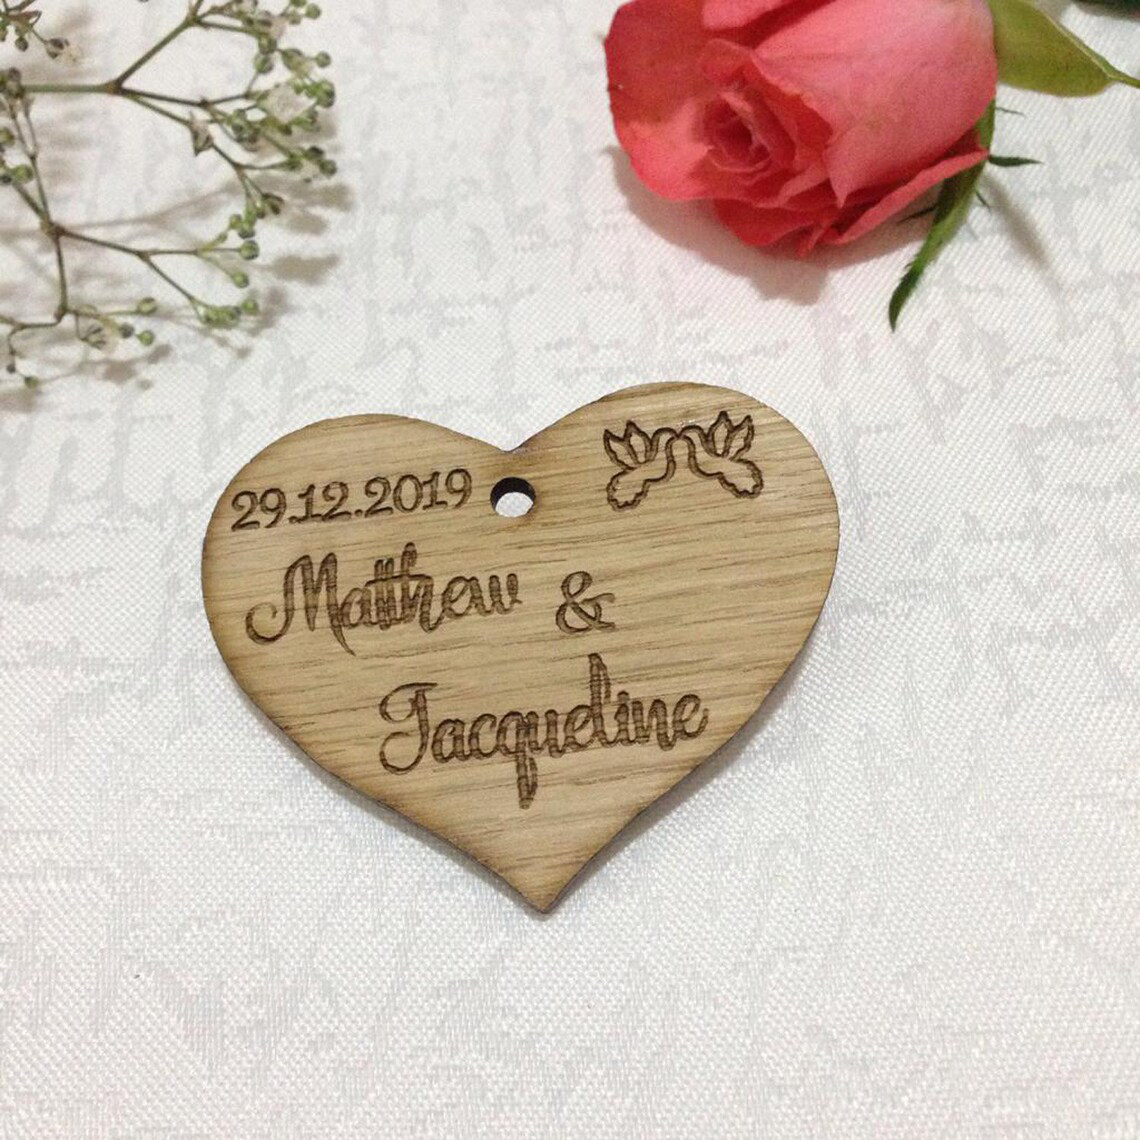 Rustic Wooden Heart Save the Date Magnet - Love Birds